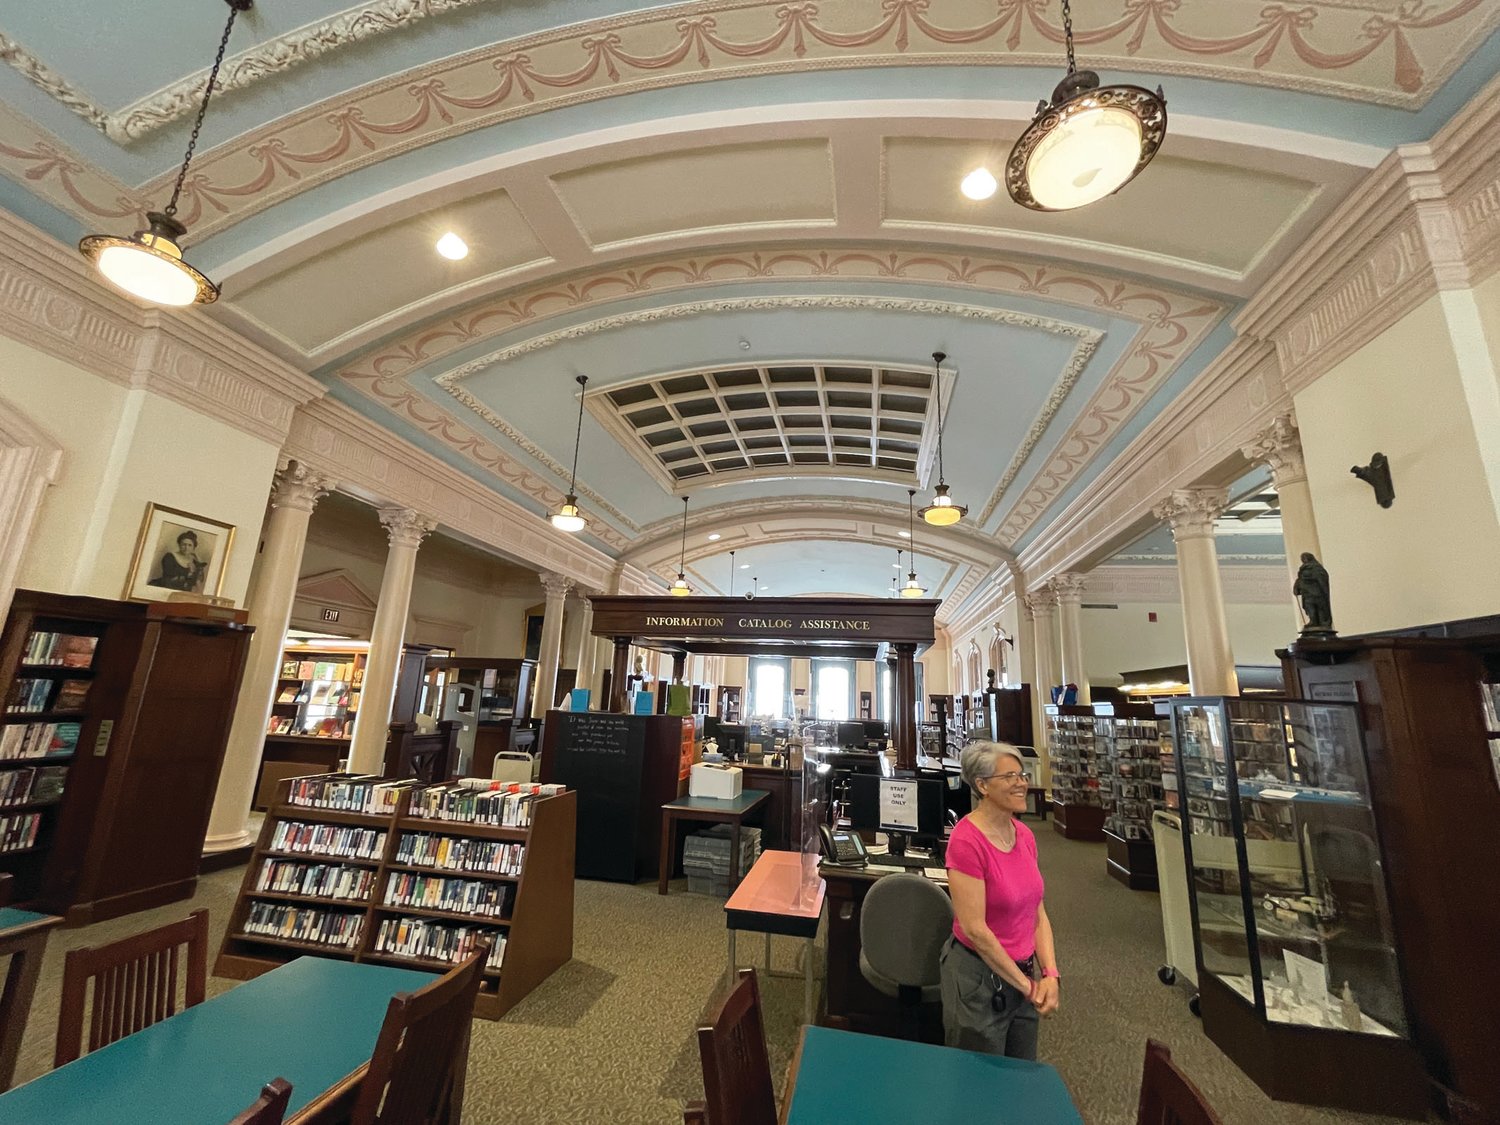 GRAND SPACE: The William Hall Library, dedicated in 1927, sits on the property that once served as the estate of its namesake. Here, librarian Robin Nyzio discusses recent improvements made to enhance the main upstairs space while maintaining its historic character.